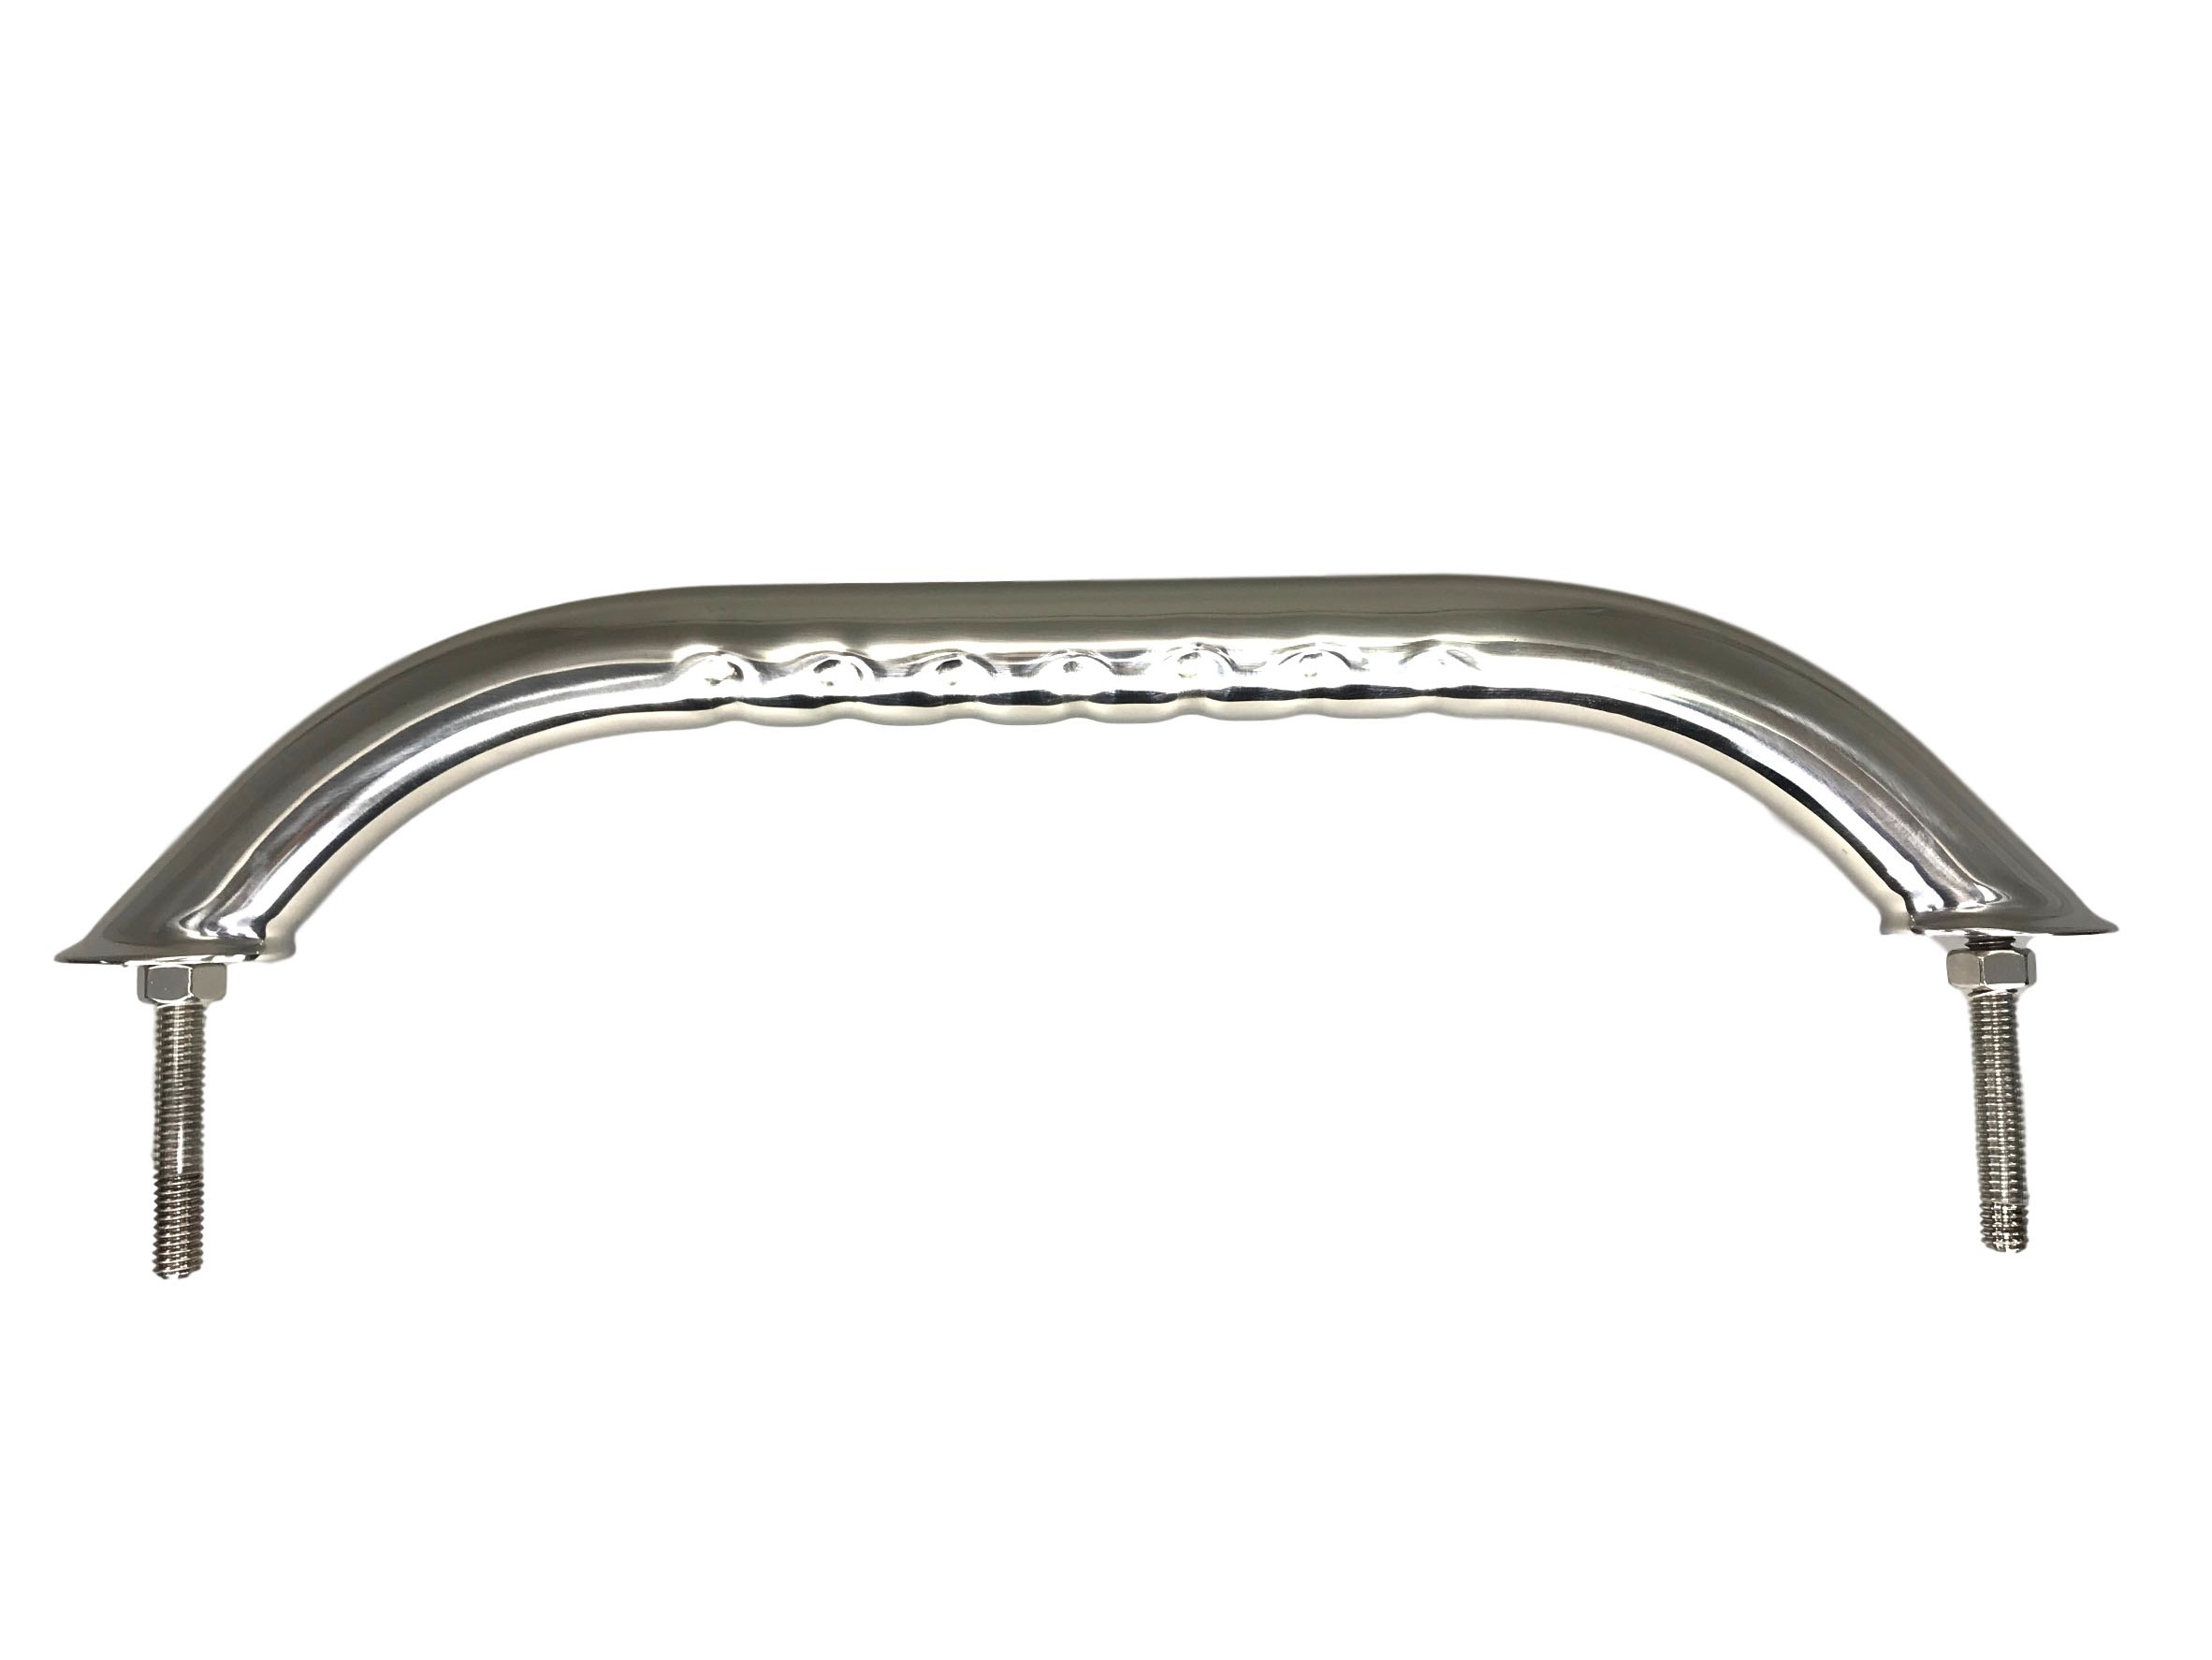 BOAT MARINE STAINLESS STEEL HANDRAIL 18 INCHES WITH WAVE CURVE HIGH QUALITY 